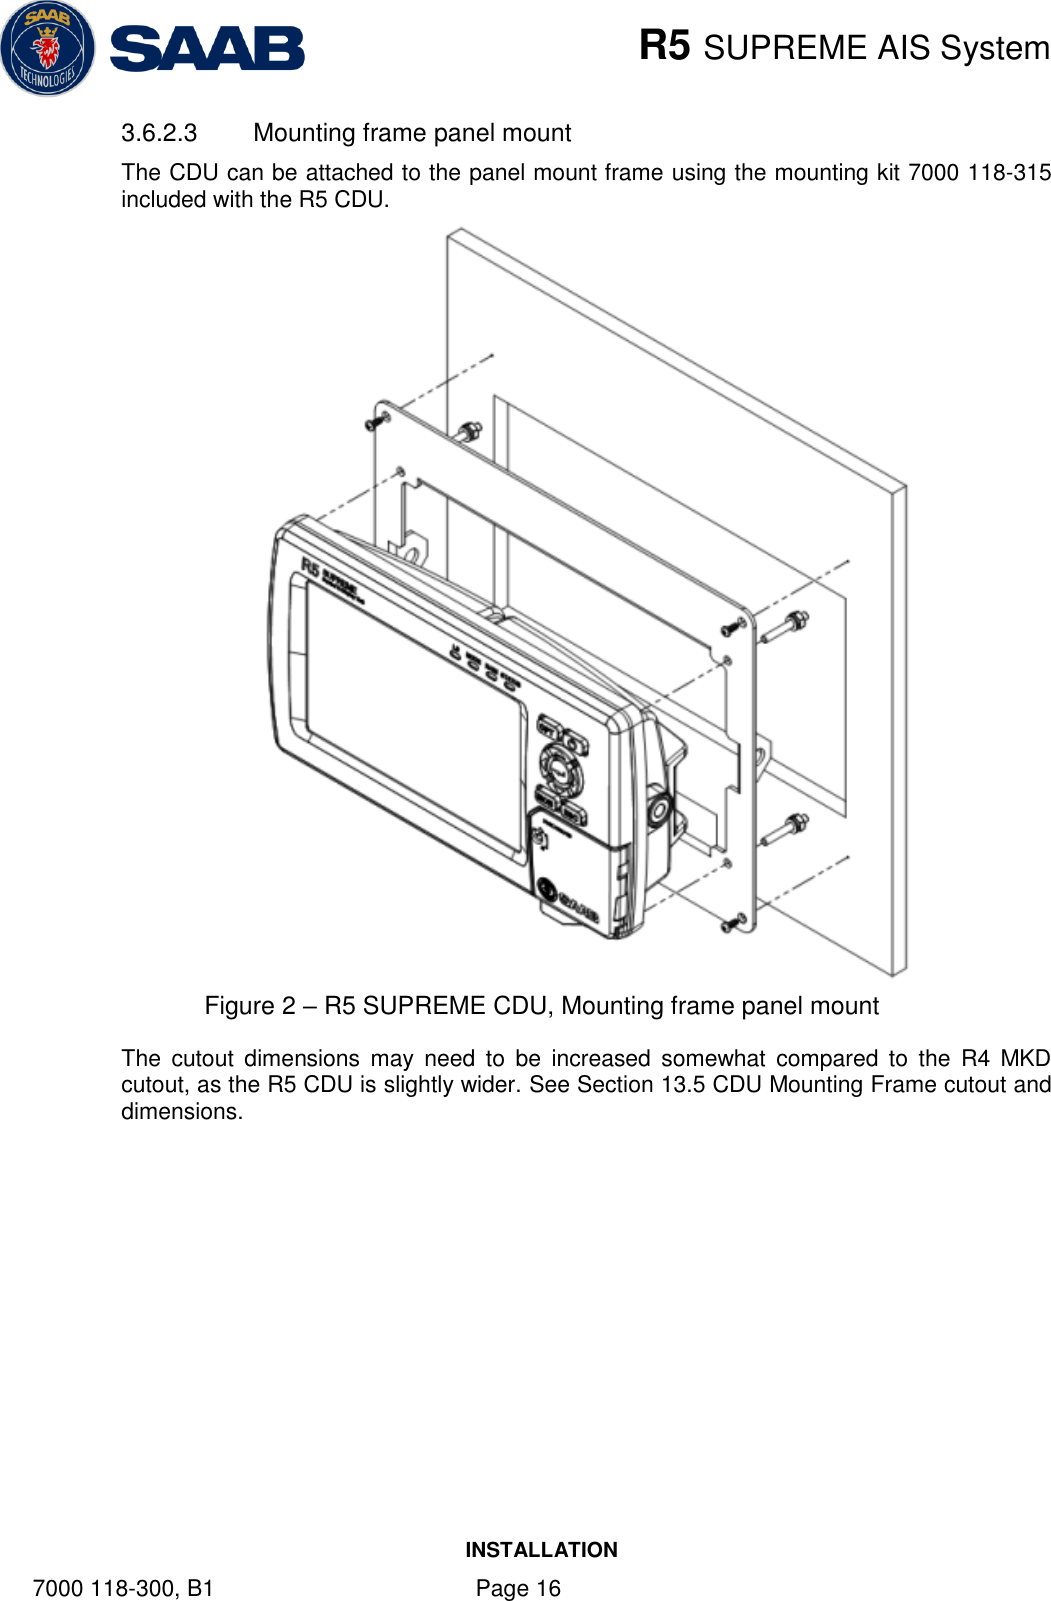    R5 SUPREME AIS System INSTALLATION 7000 118-300, B1    Page 16 3.6.2.3    Mounting frame panel mount The CDU can be attached to the panel mount frame using the mounting kit 7000 118-315 included with the R5 CDU.  Figure 2 – R5 SUPREME CDU, Mounting frame panel mount The  cutout  dimensions  may  need  to  be  increased  somewhat  compared  to  the  R4  MKD cutout, as the R5 CDU is slightly wider. See Section 13.5 CDU Mounting Frame cutout and dimensions.    